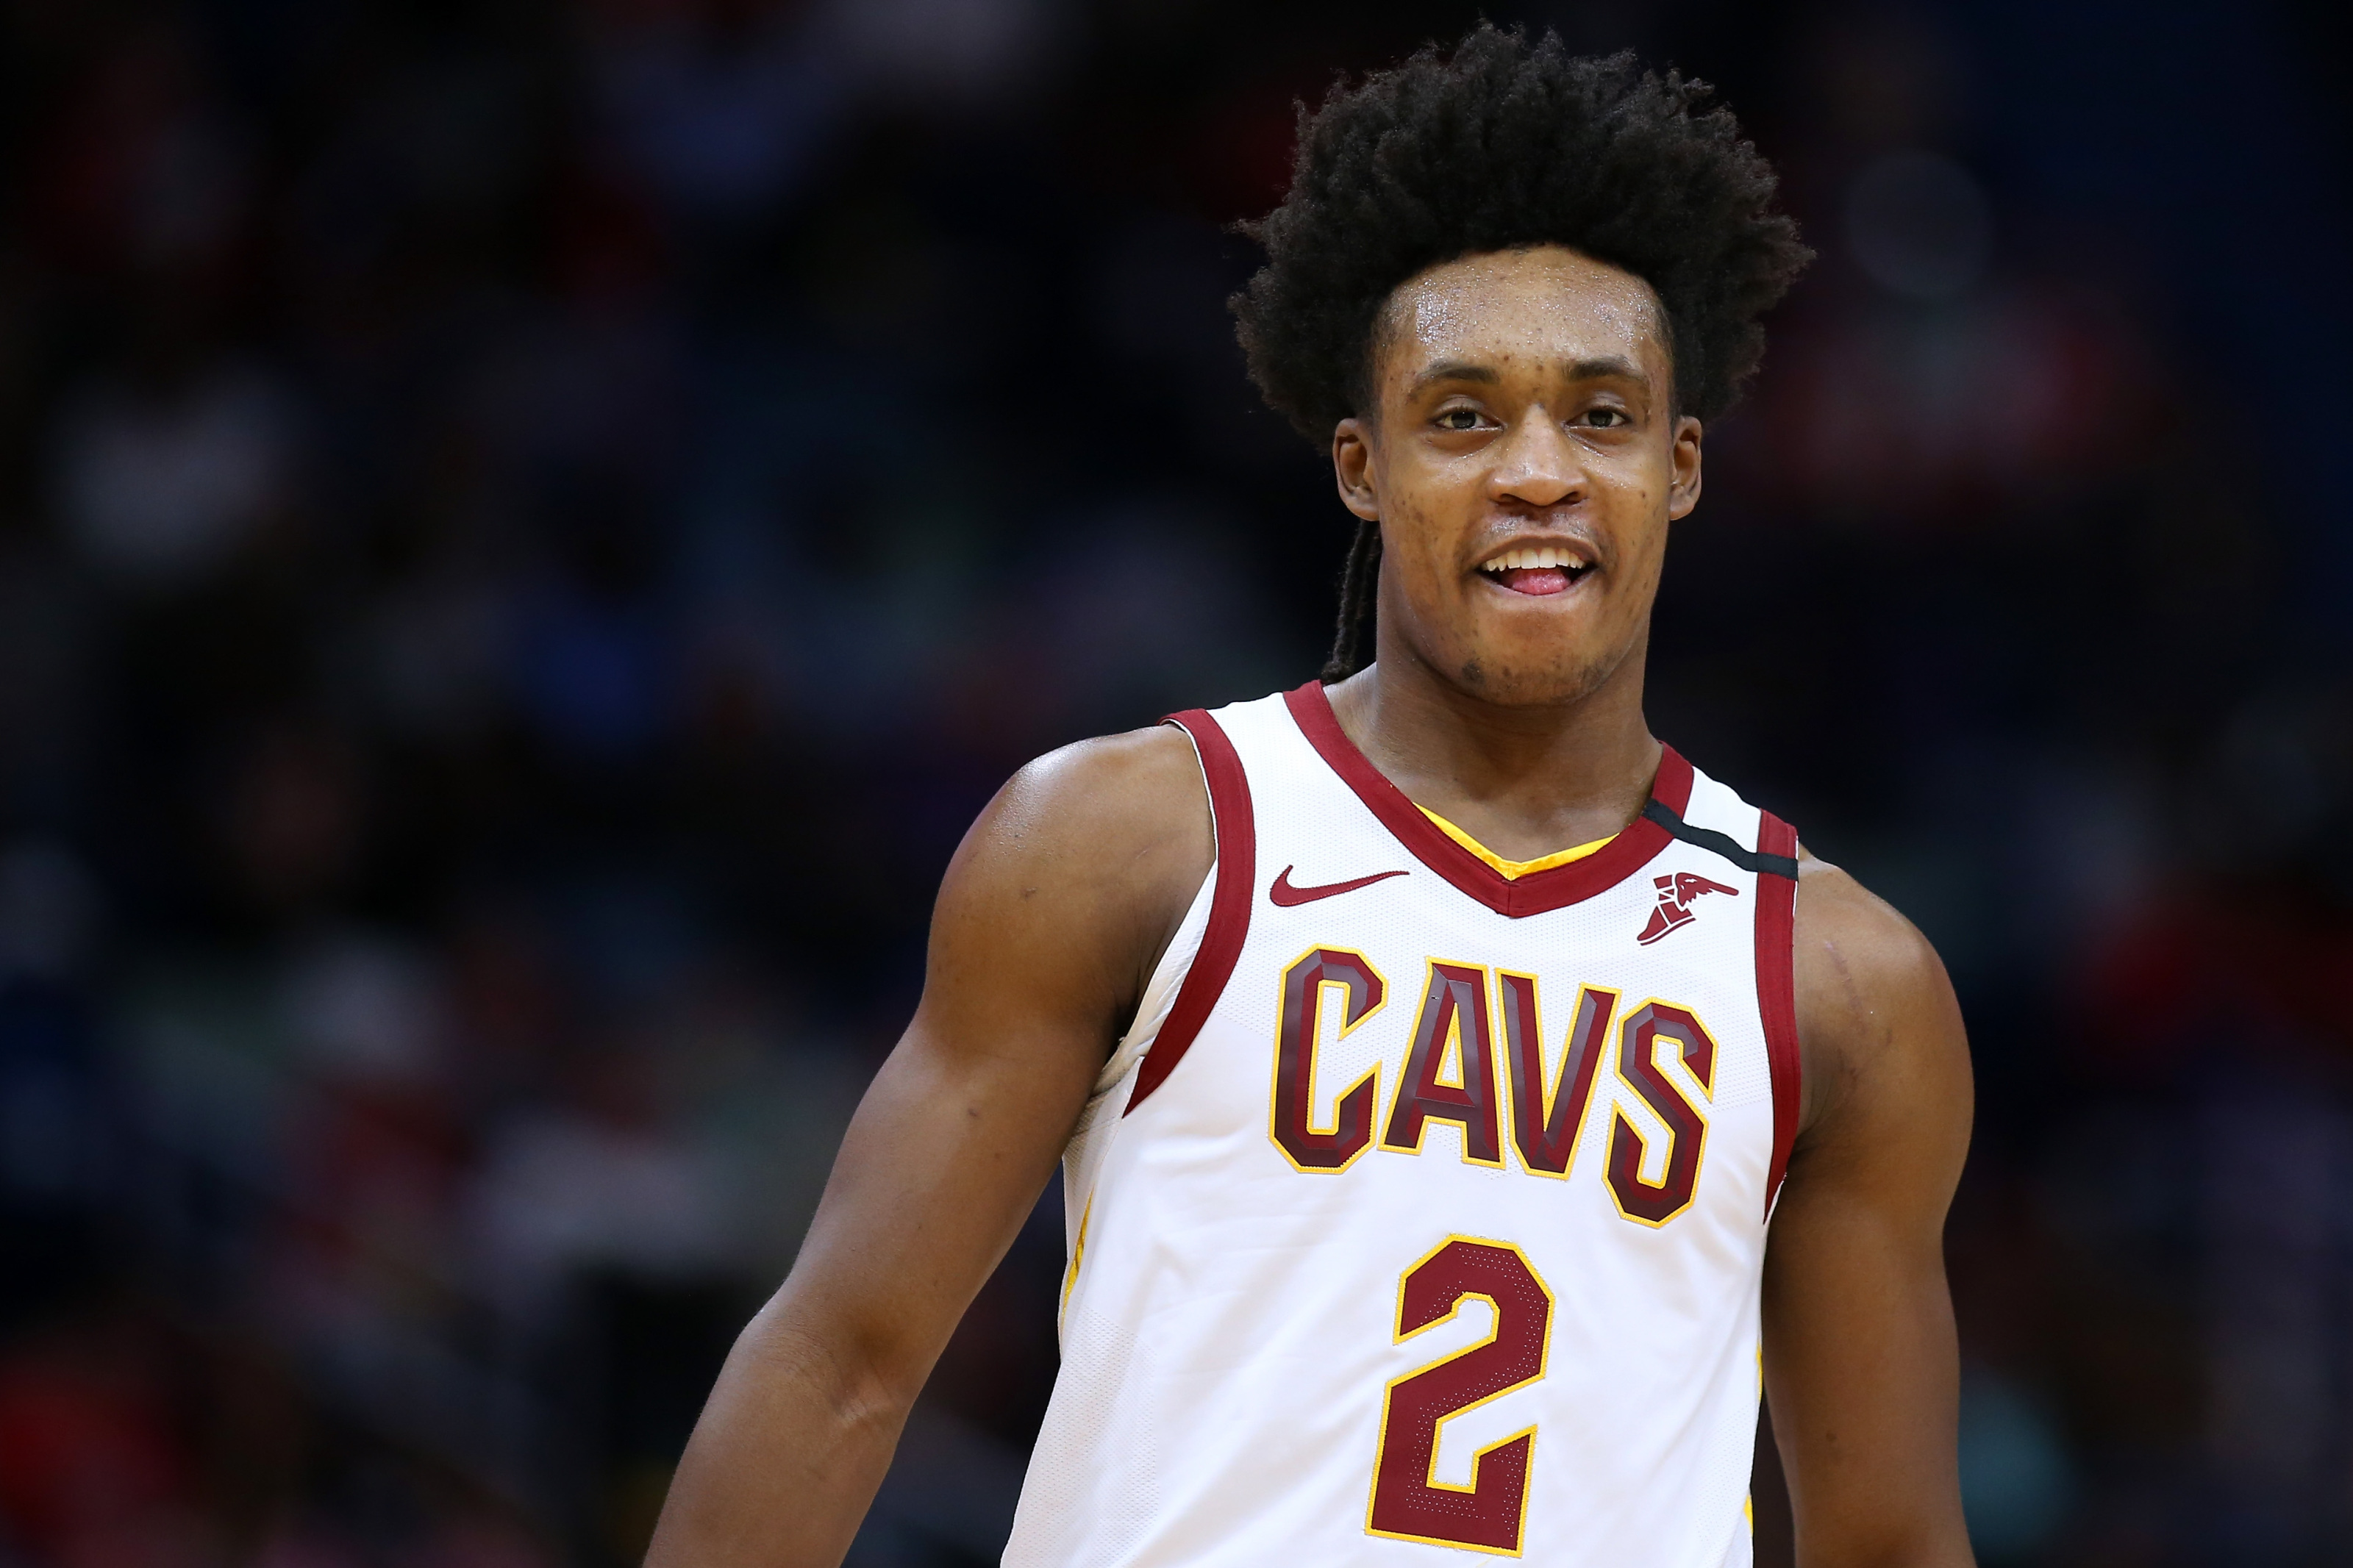 The future is bright for Collin Sexton. - Cleveland Cavaliers